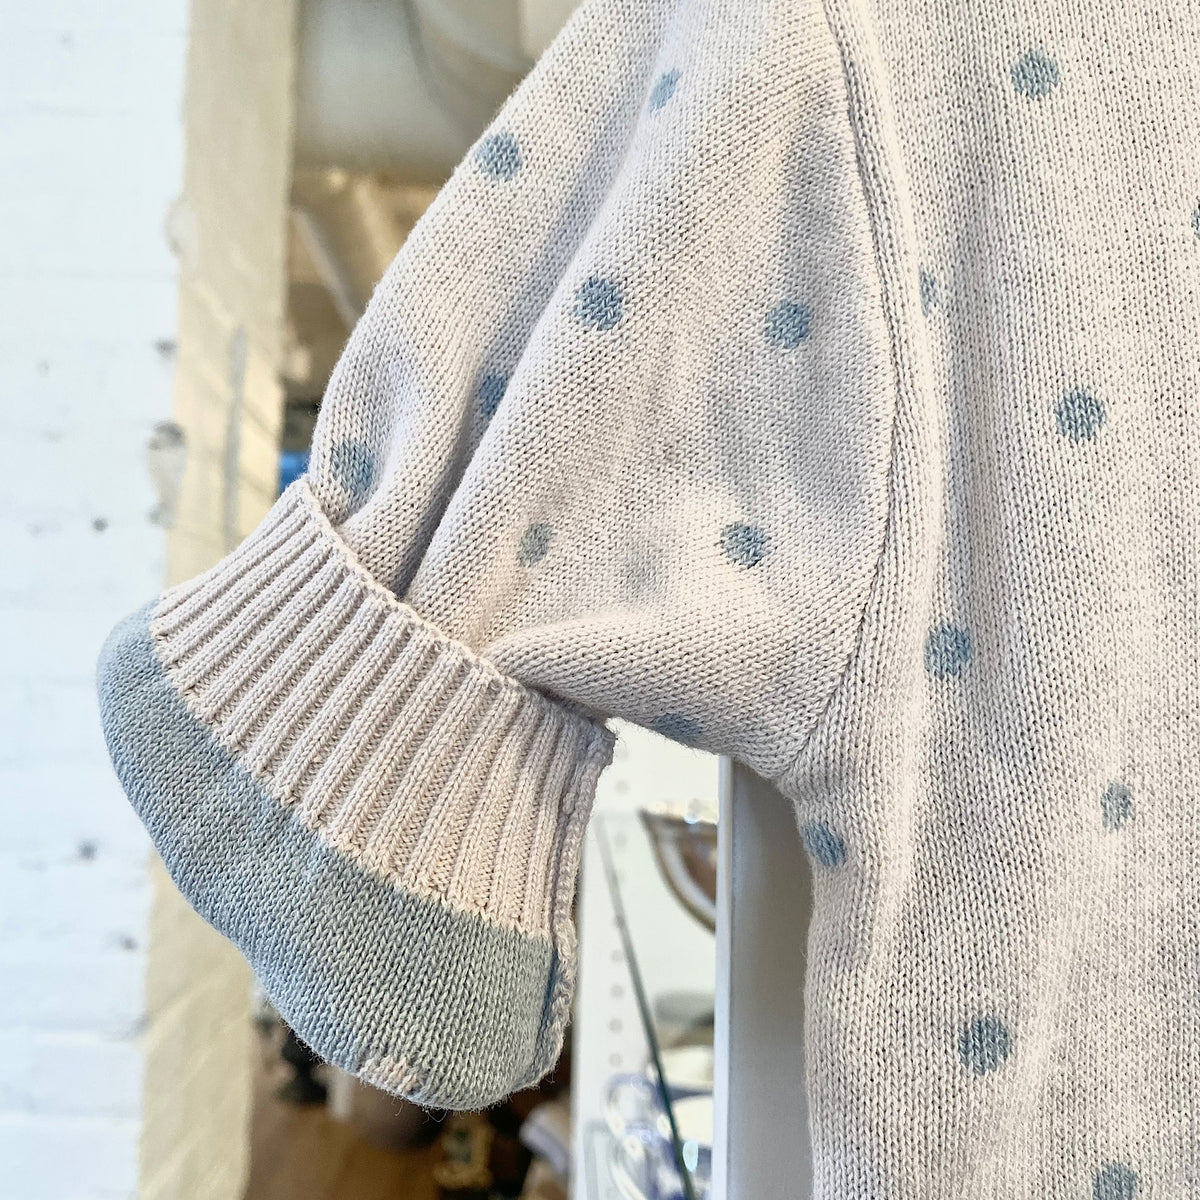 Cream patterned sweater with blue polka dots, newborn